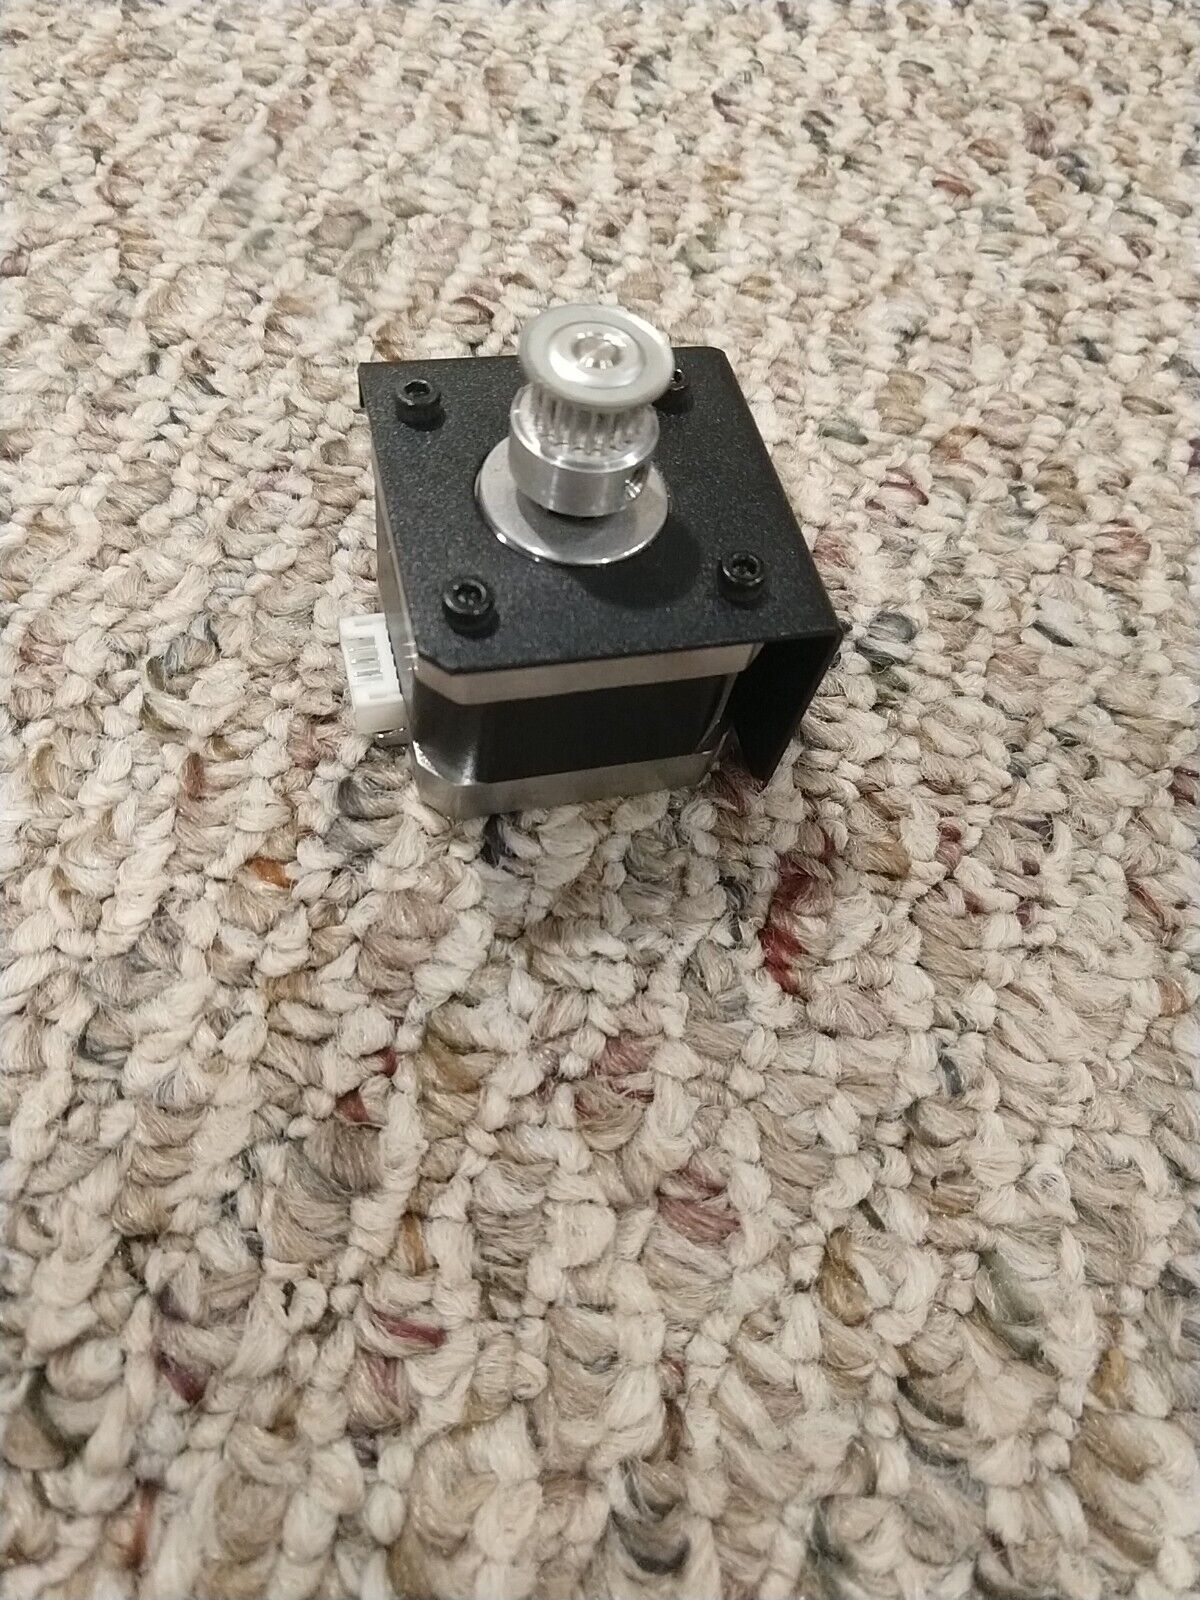 Monoprice Maker Select Y Axis Motor Stepper Motor with mount and pulley.